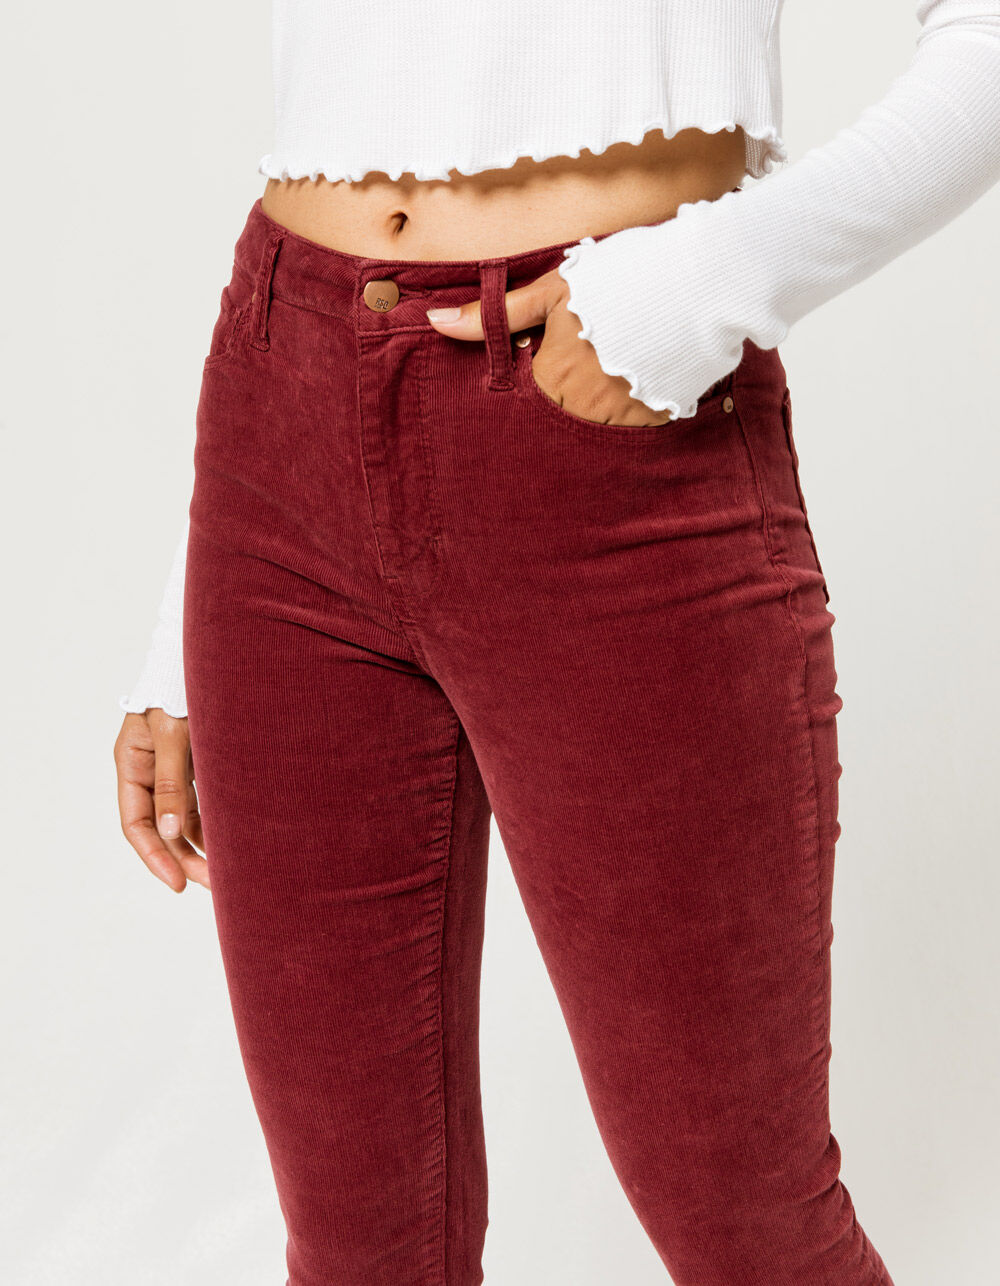 RSQ High Rise Ankle Corduroy Wine Womens Skinny Jeans - WINE | Tillys